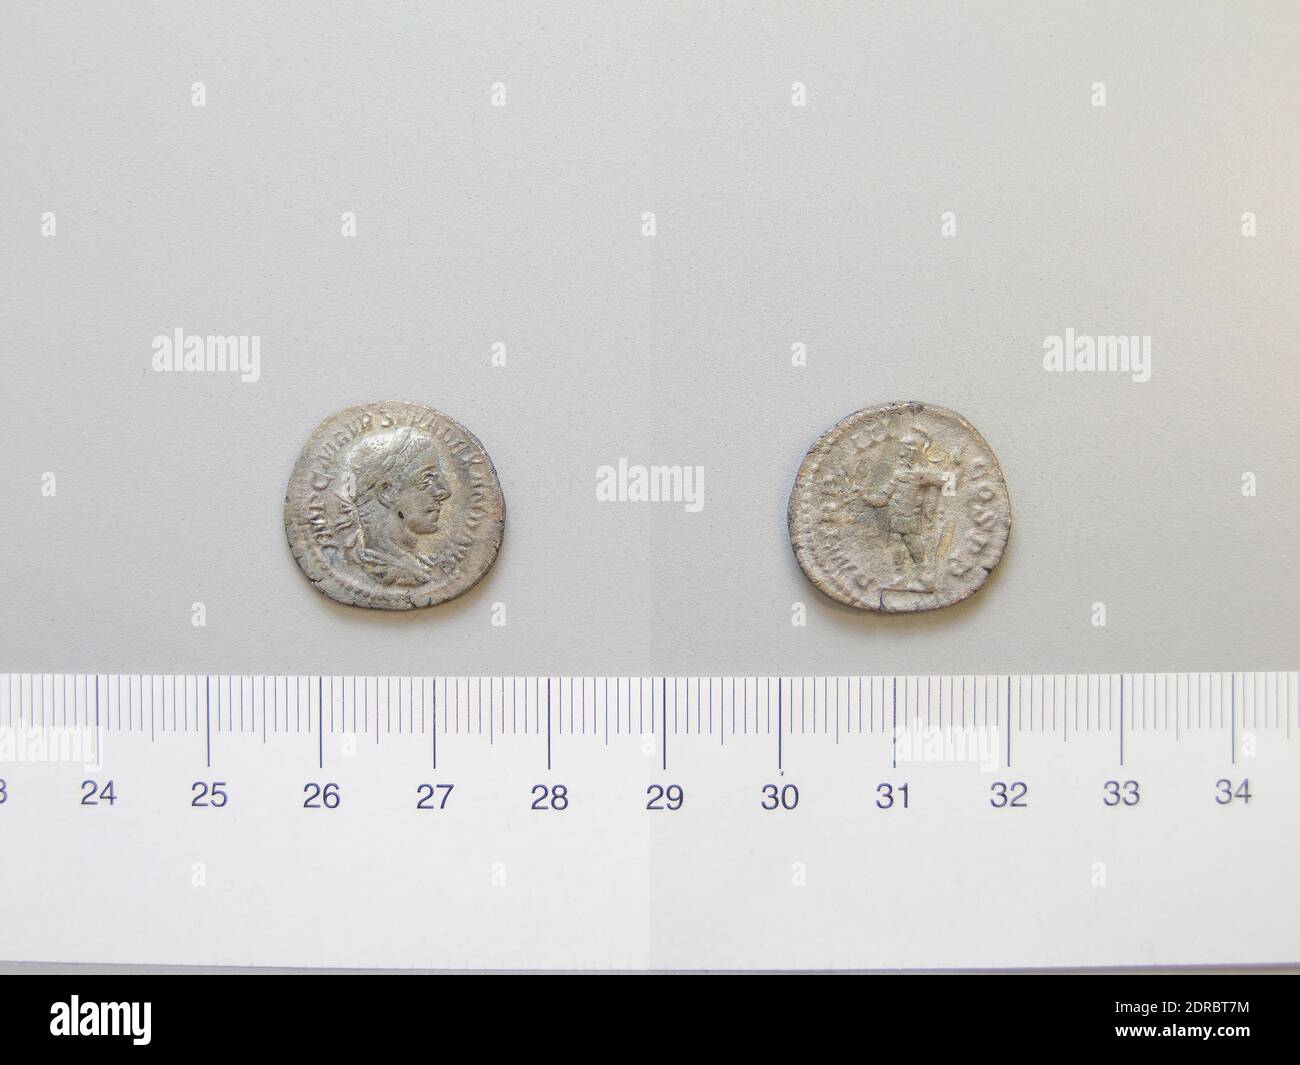 Ruler: Severus Alexander, Emperor of Rome, A.D. 208–235, ruled A.D. 222–35, Mint: Rome, Denarius of Severus Alexander, Emperor of Rome from Rome, 224, Silver, 1.49 g, 12:00, 19.5 mm, Made in Rome, Italy, Roman, 3rd century A.D., Numismatics Stock Photo